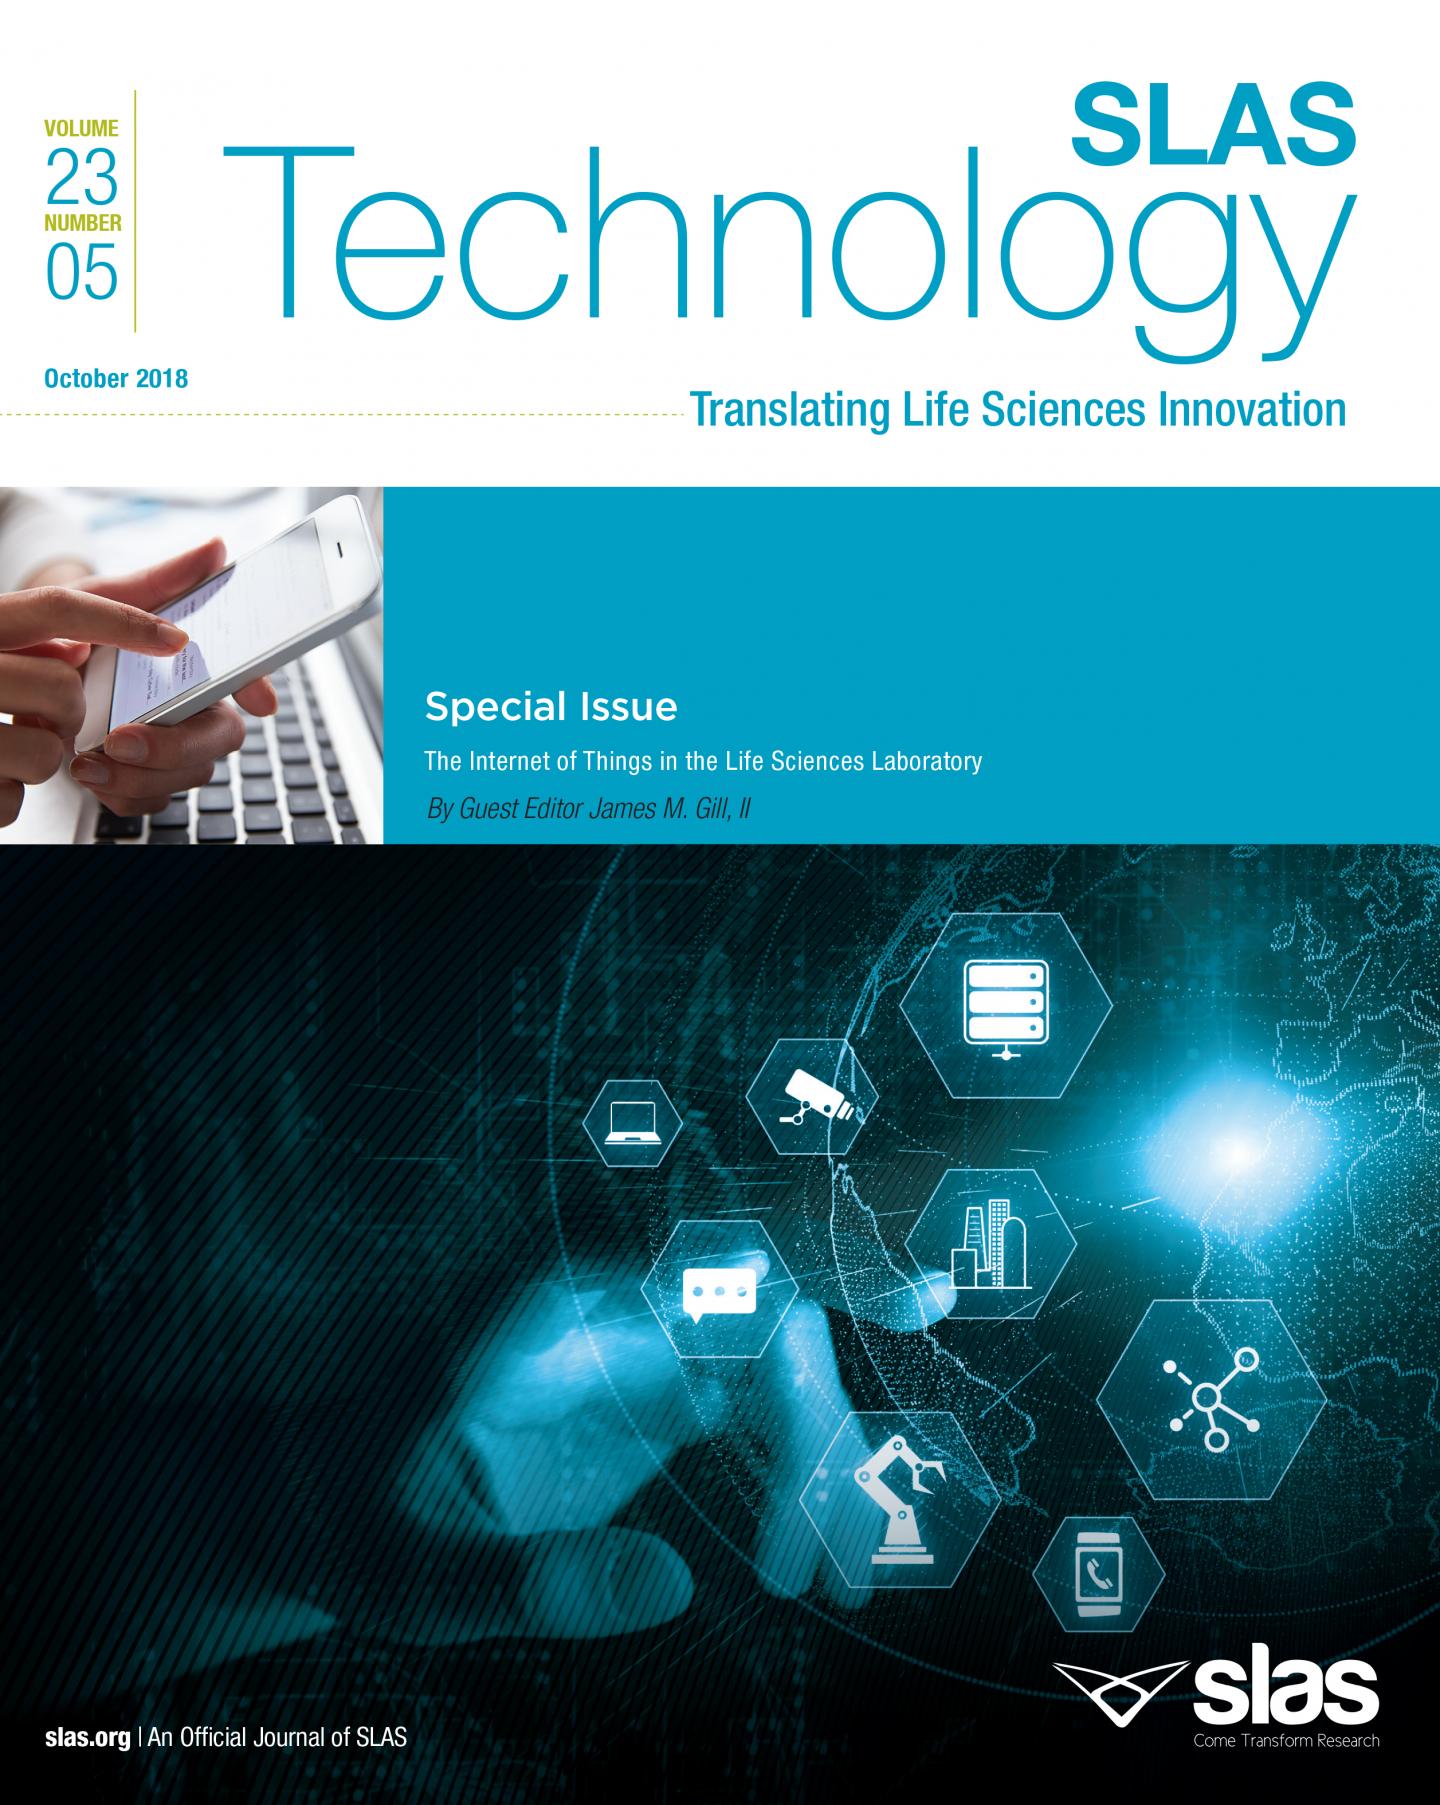 The Internet of Things in the Life Sciences Laboratory